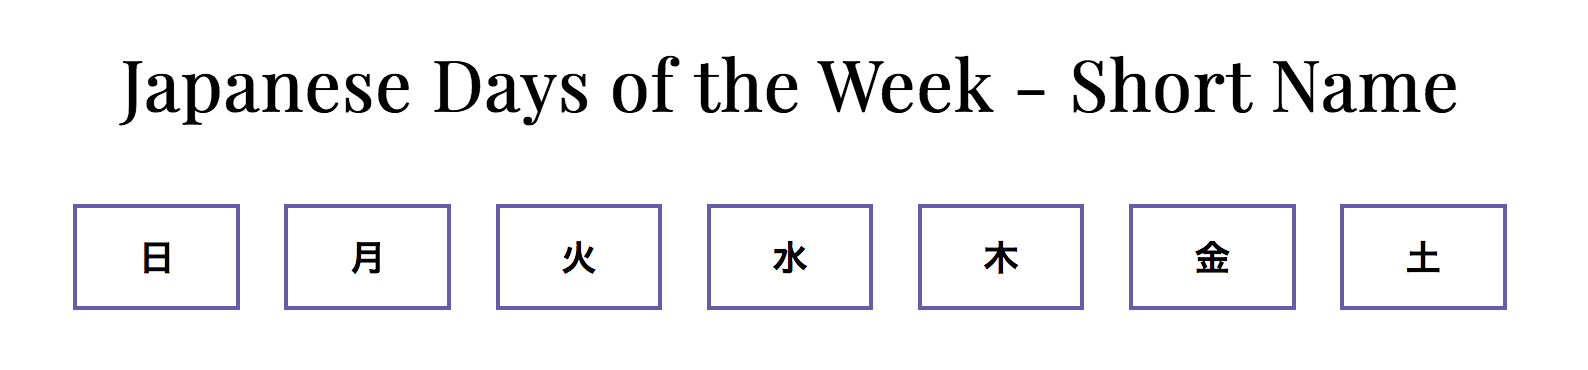 day of the week selector in Japanese using narrow names